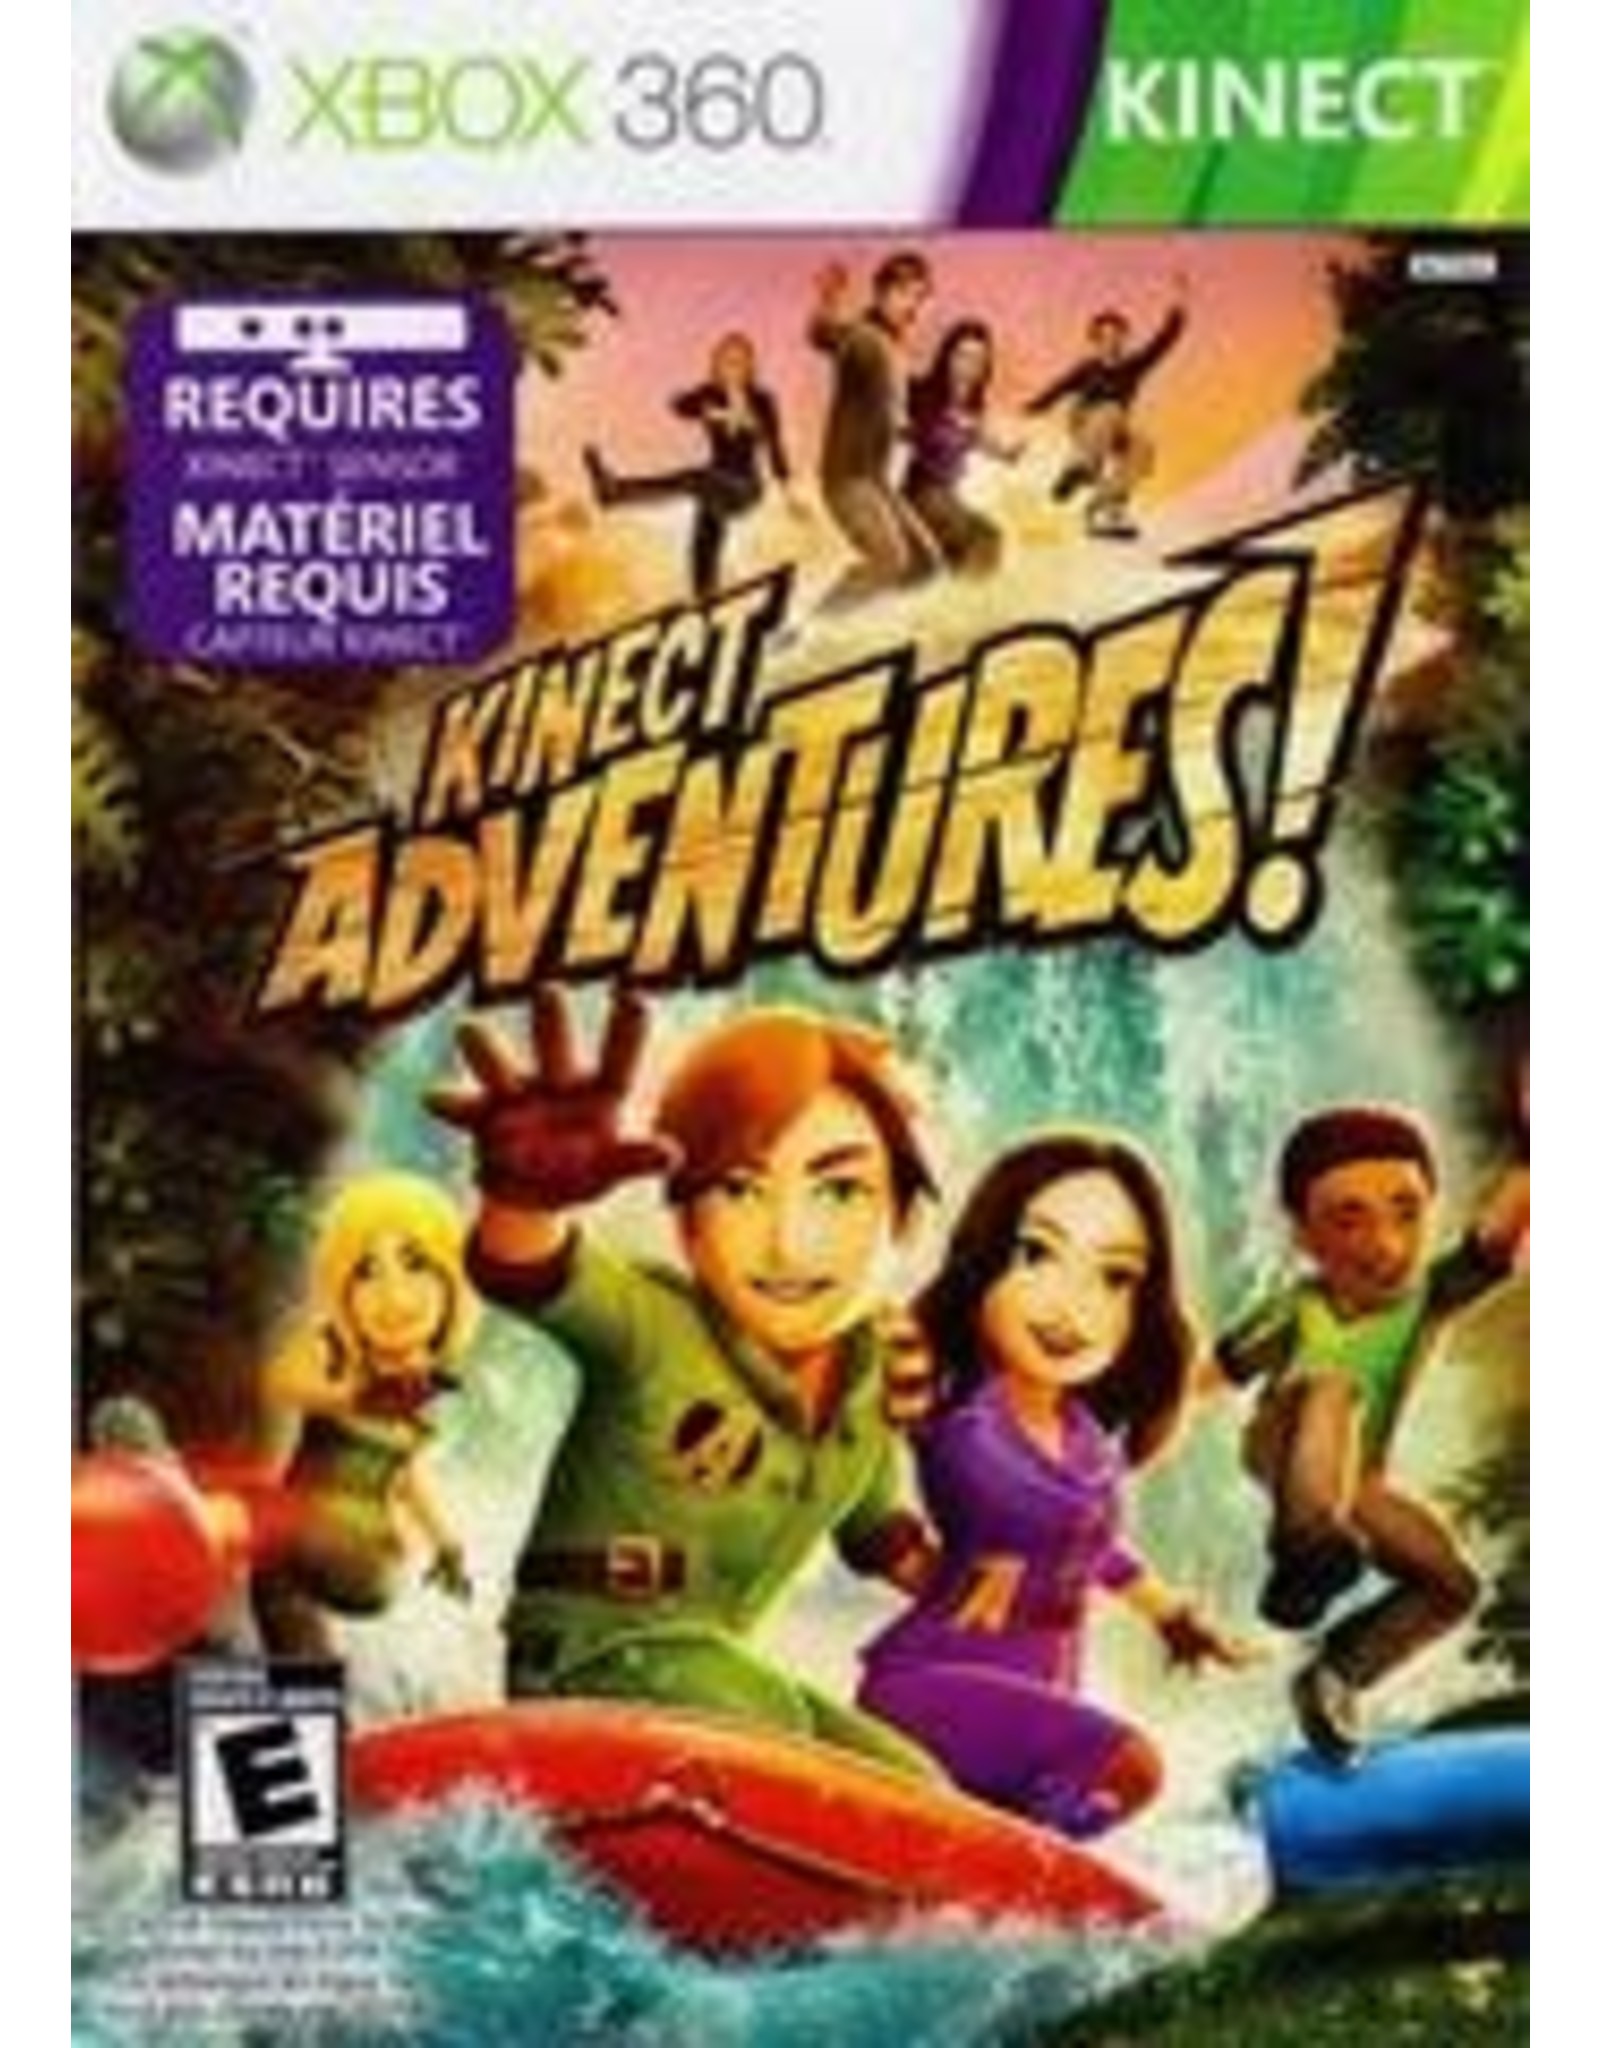 Xbox 360 Kinect Adventures (Used, No Manual)